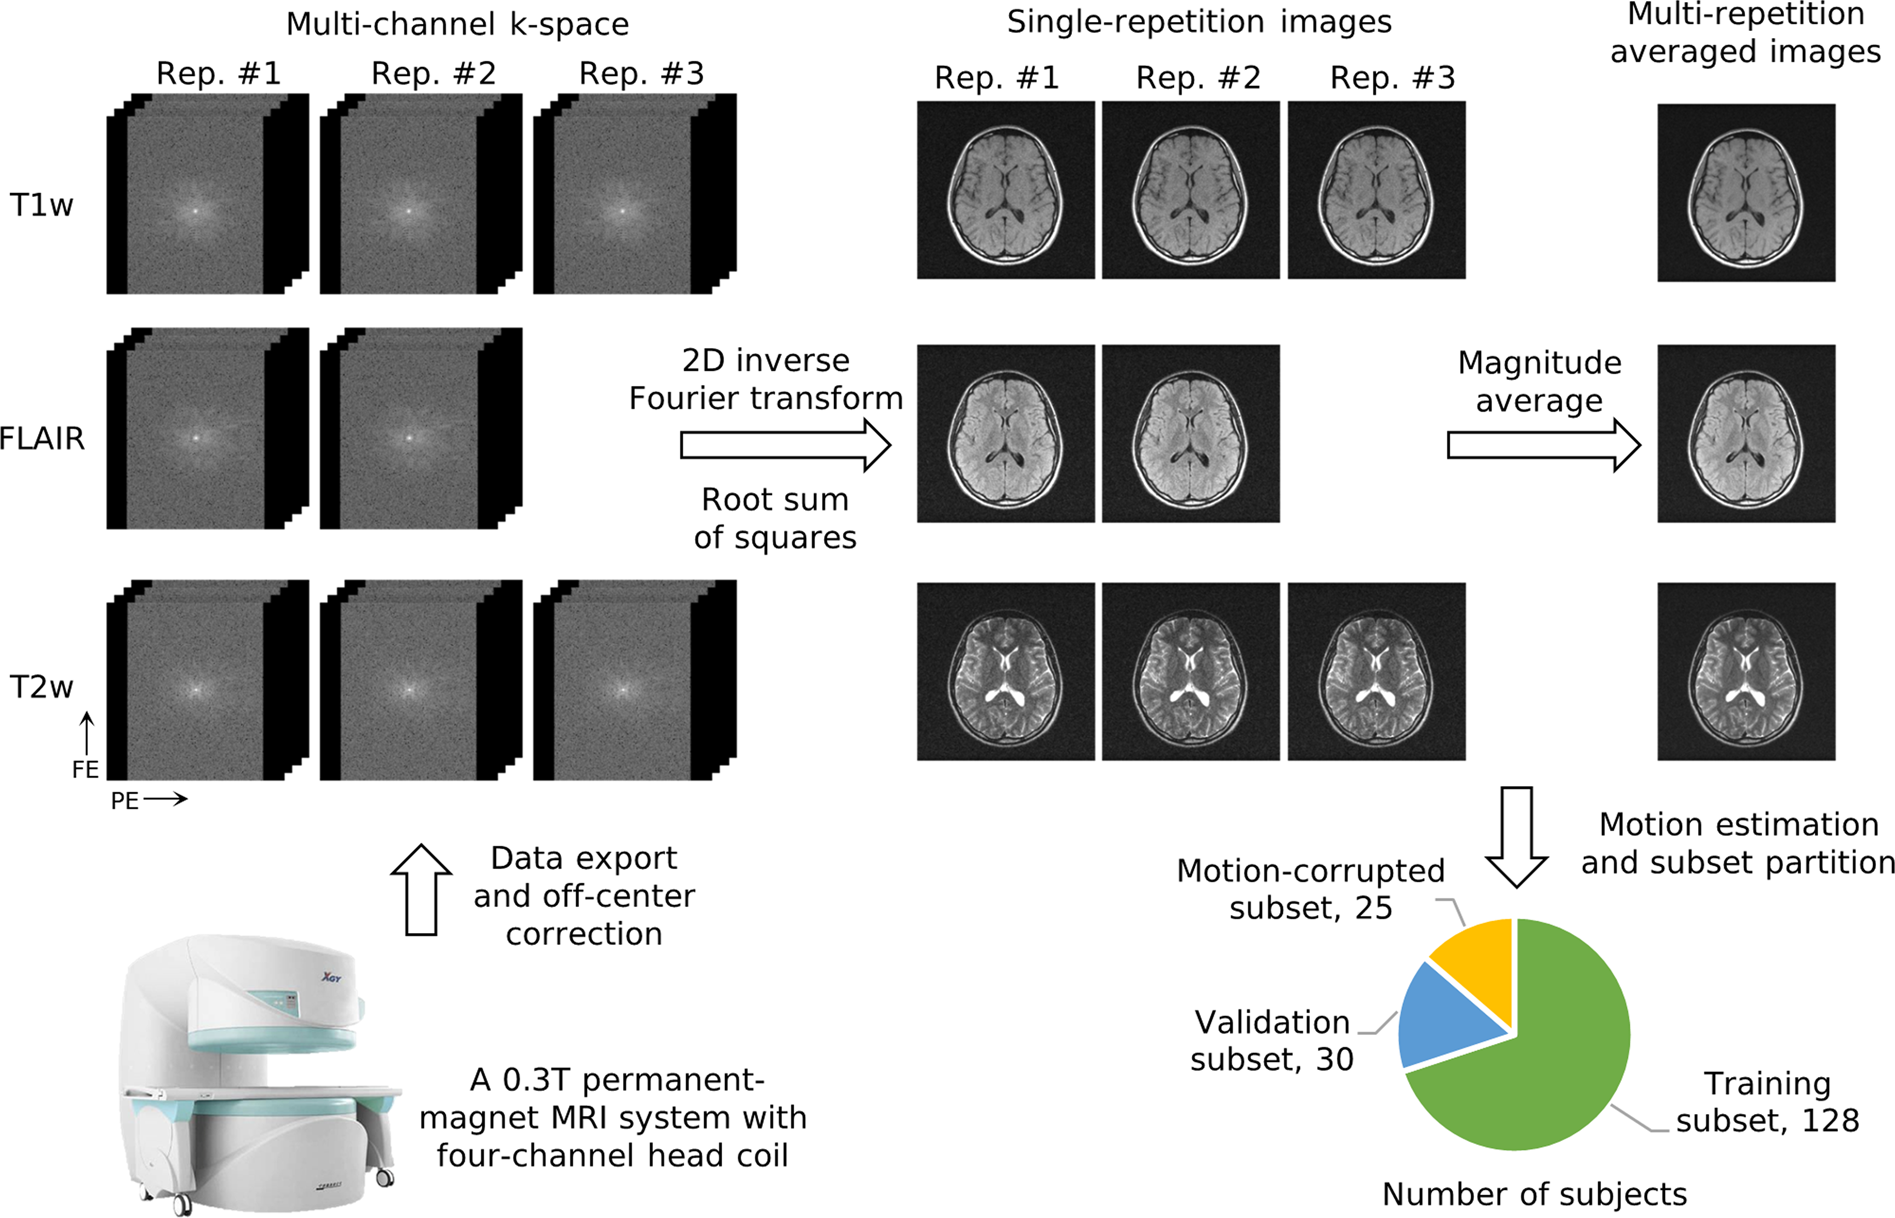 M4Raw: A multi-contrast, multi-repetition, multi-channel MRI k-space  dataset for low-field MRI research